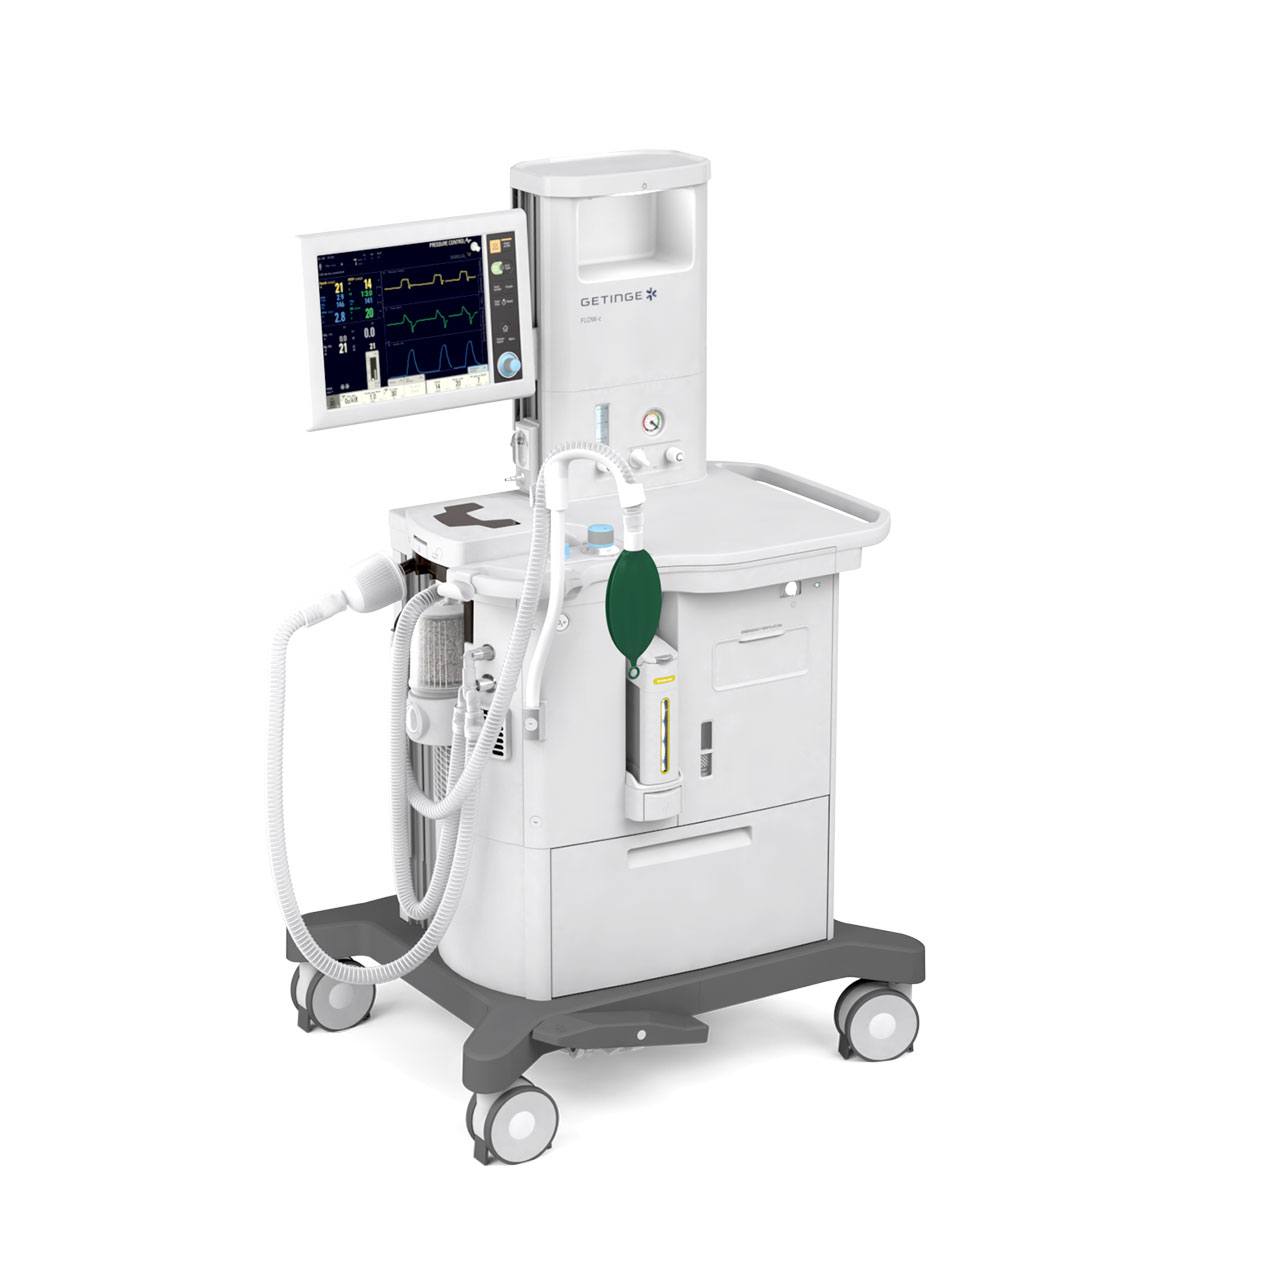 Getinge Flow-c is our compact, easy-to-use anesthesia machine for the busy OR